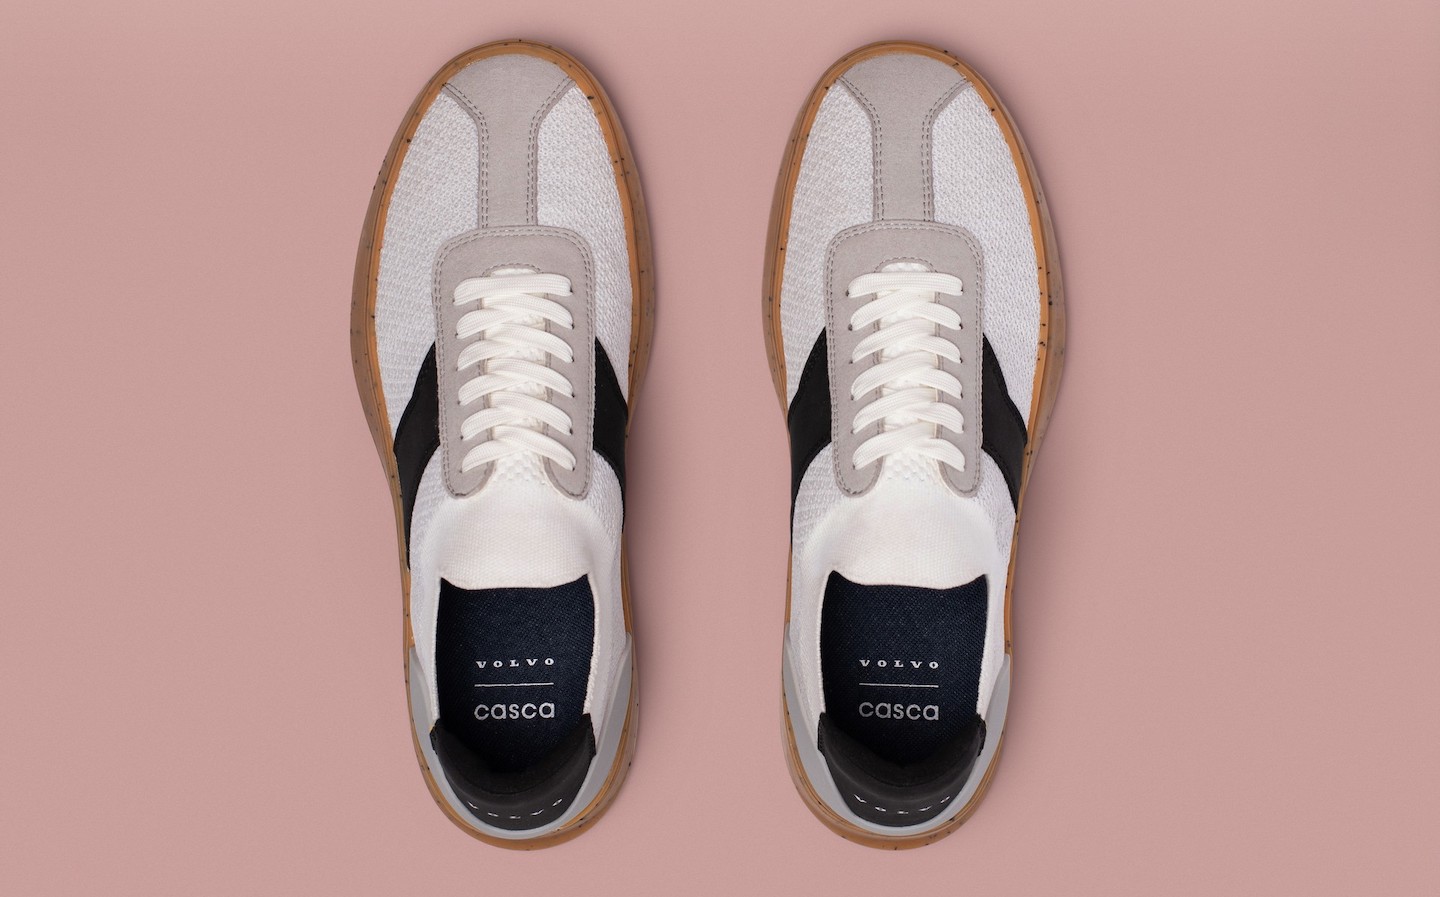 Volvo x Casca shoes